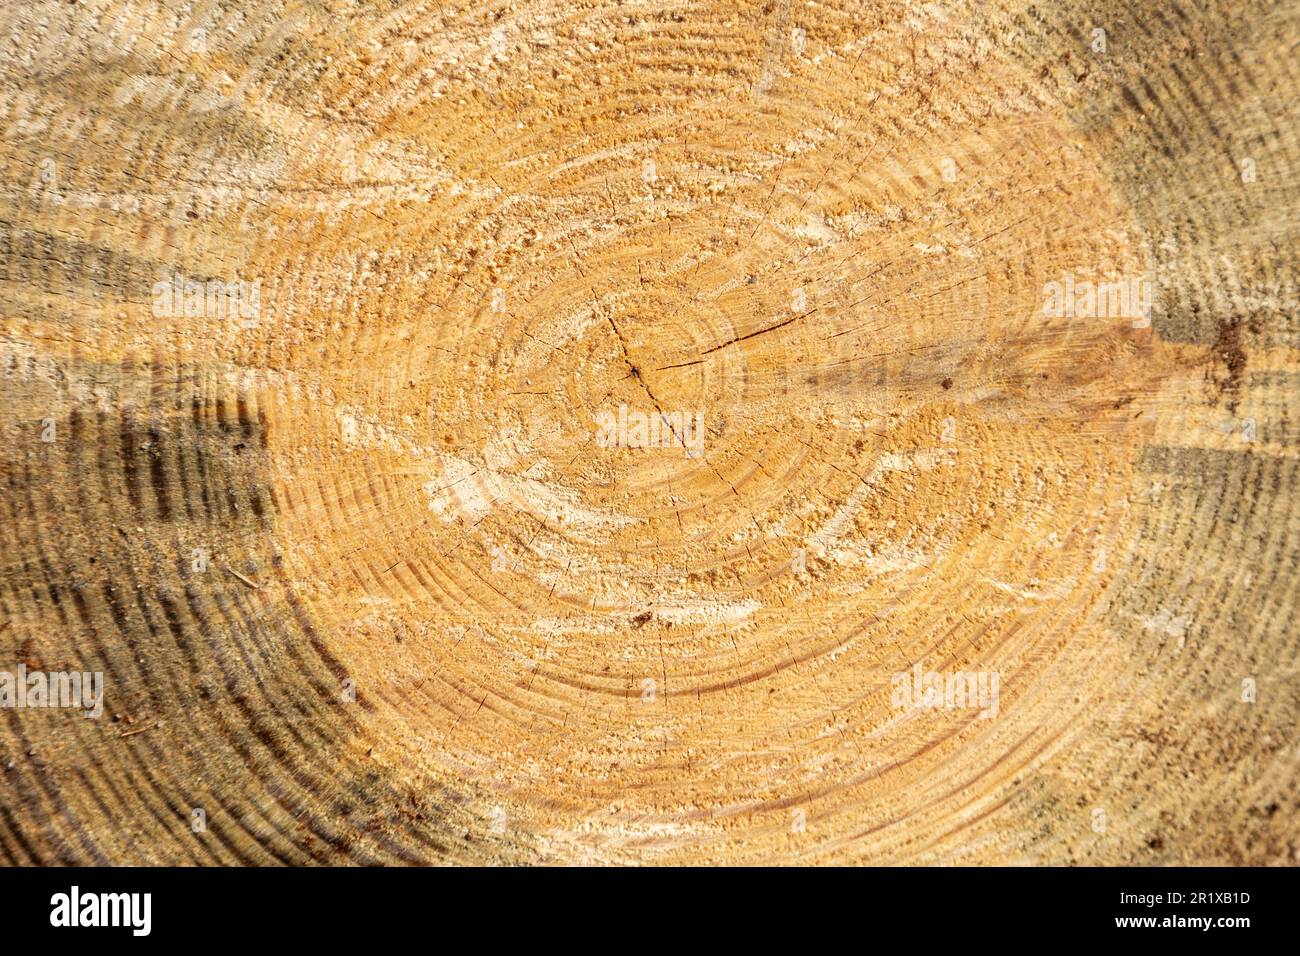 Tree rings on end of cut pine tree. Stock Photo